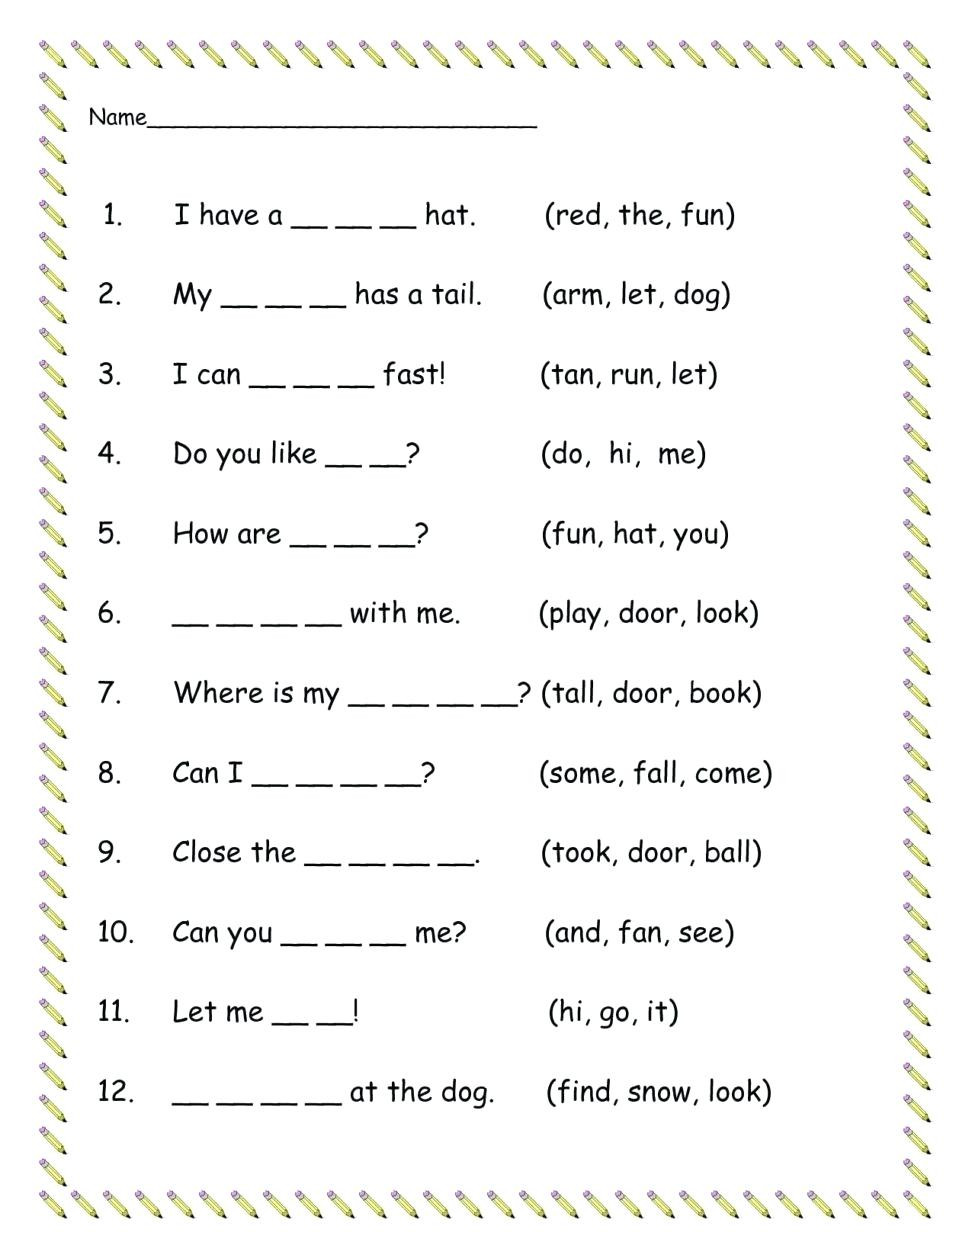 Second Grade History Worksheets 1st Grade Coloring Art Book Iq Test for Second Graders